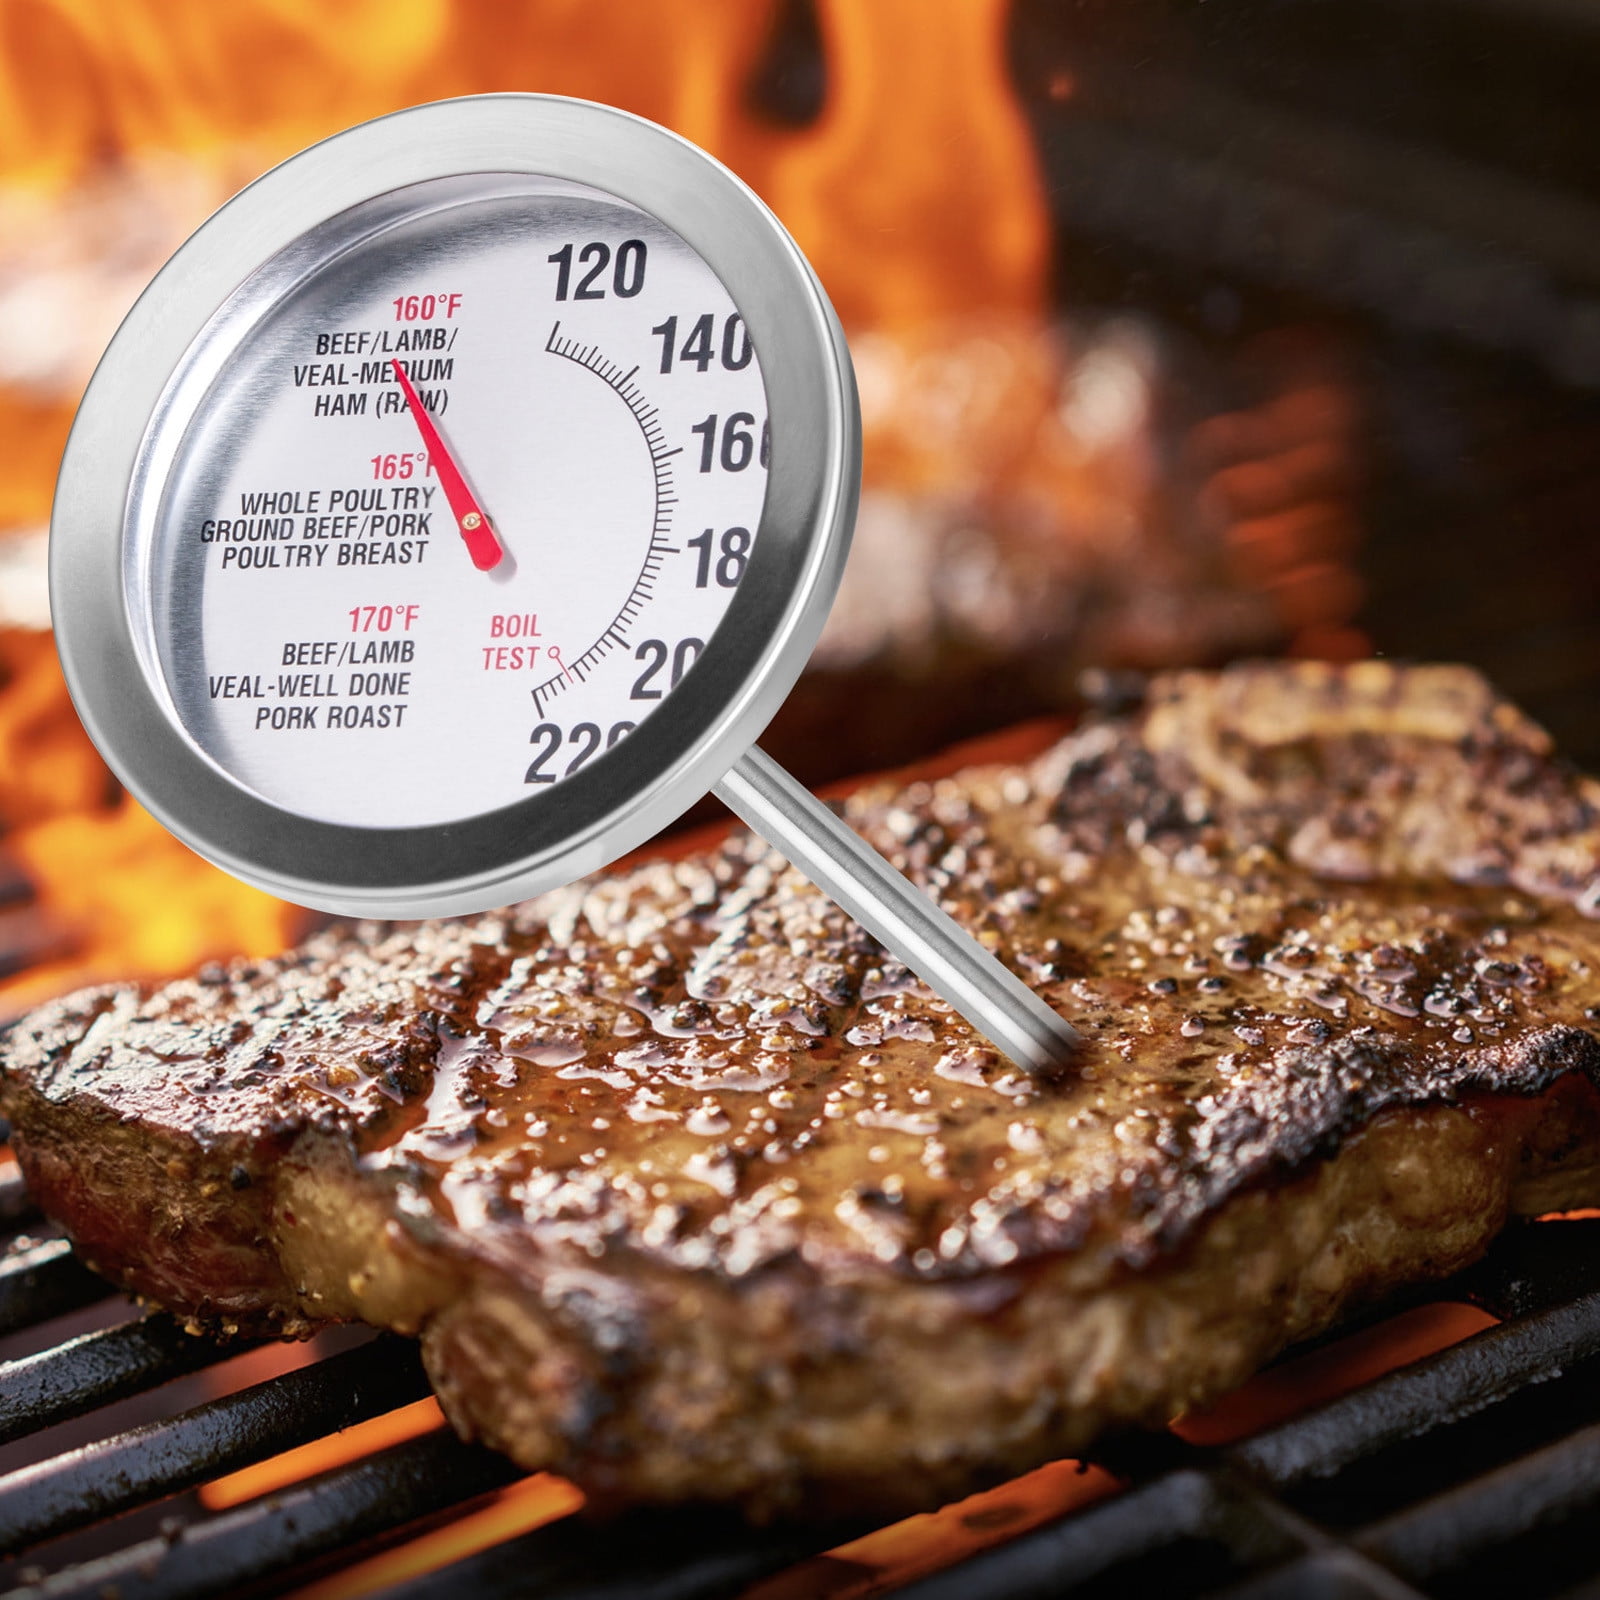 ANNSEA SINARDO Meat Thermometer for Oven T731, BBQ Thermometer, Oven Safe,  Large 2.5-Inch Easy-Read Face, Stainless Steel Stem and Housing